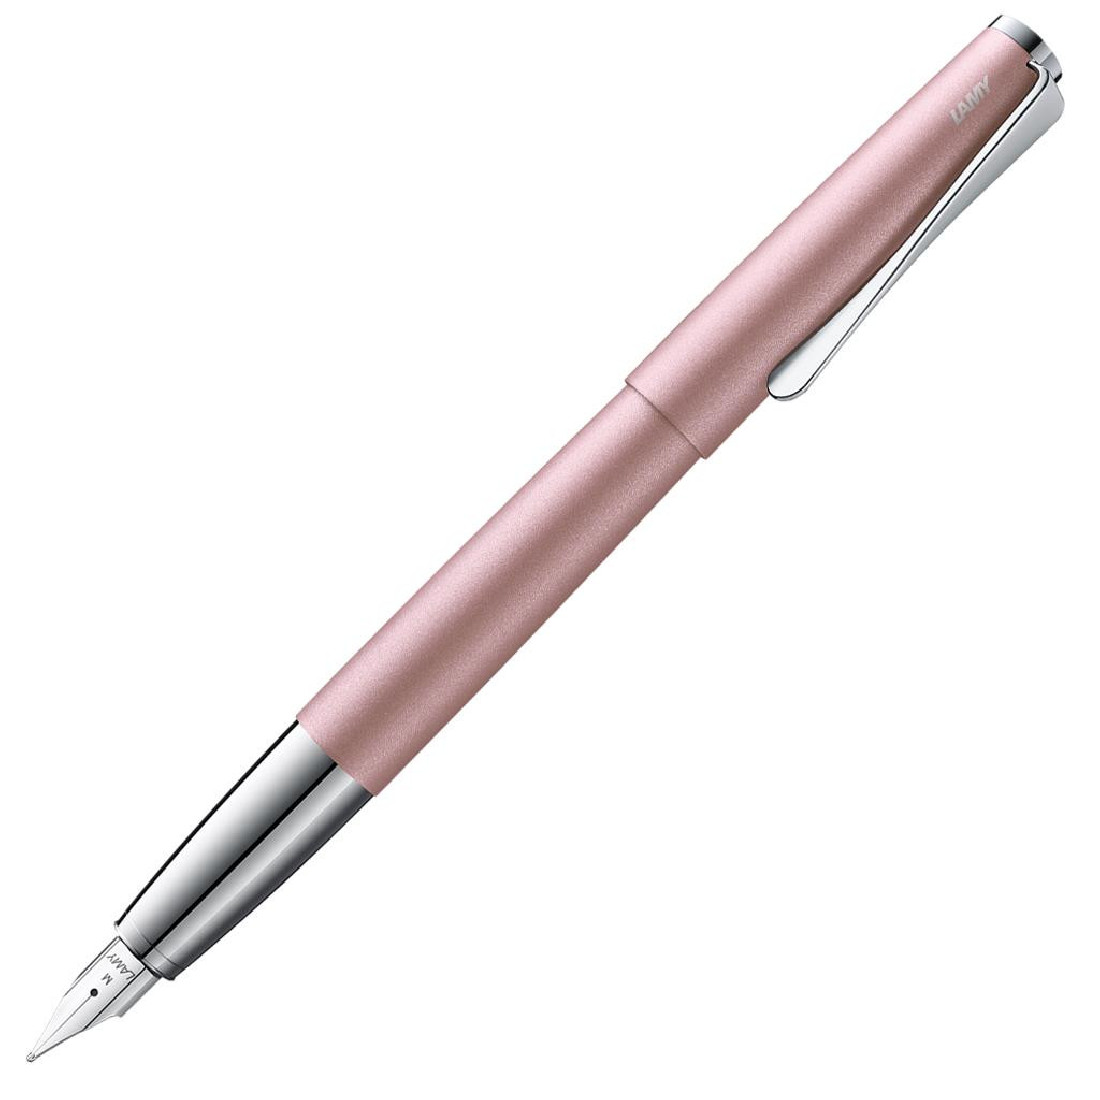 product photo of a Lamy studio fountain pen with a light pink, matte finish